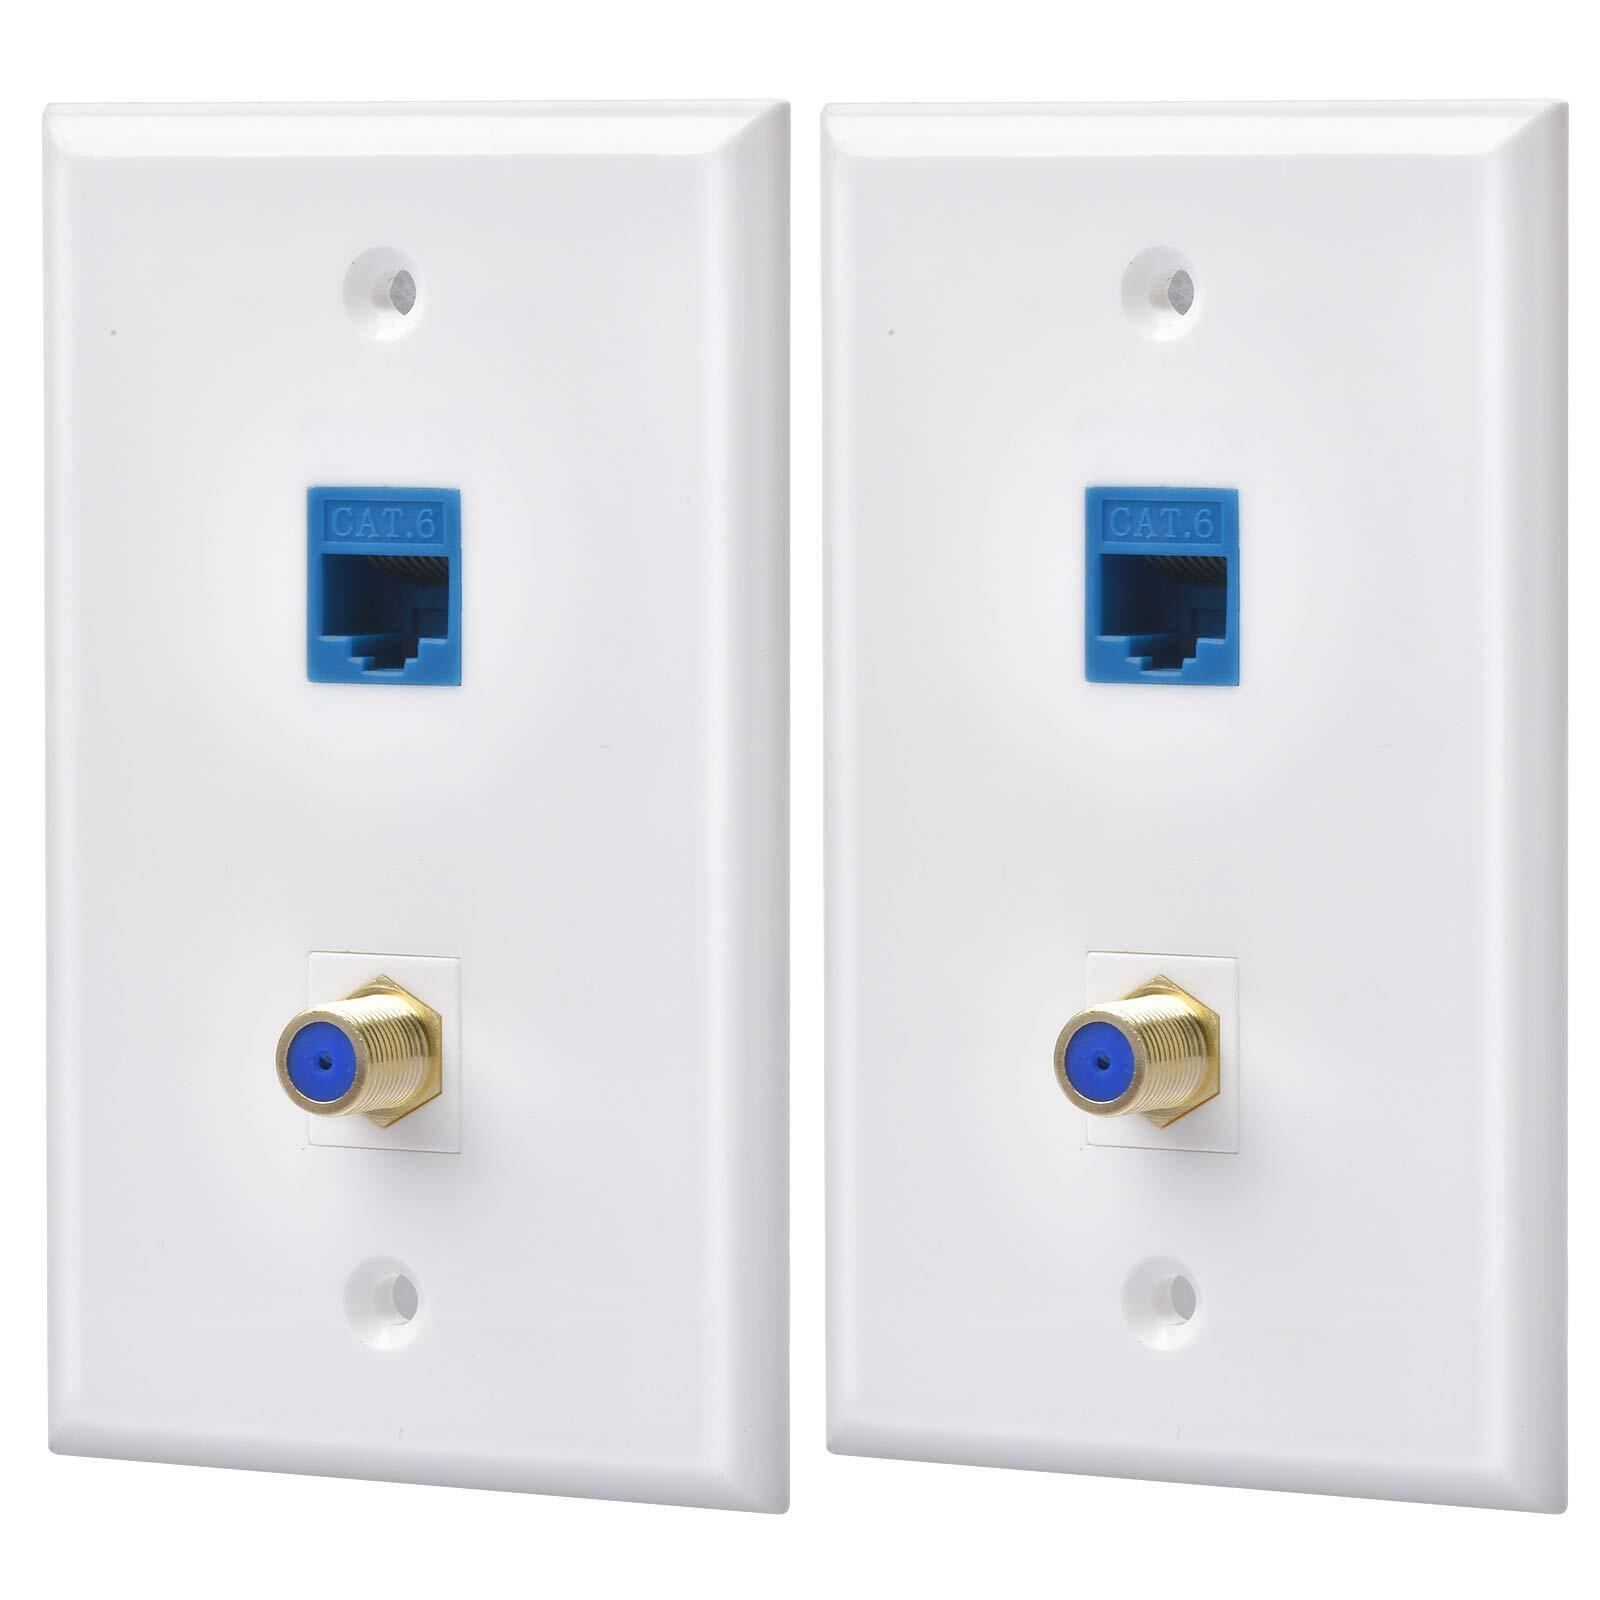 2 Packs Ethernet Coax Wall Plate Outlet with 1 Cat6 Keystone Port and 1 Gold-...